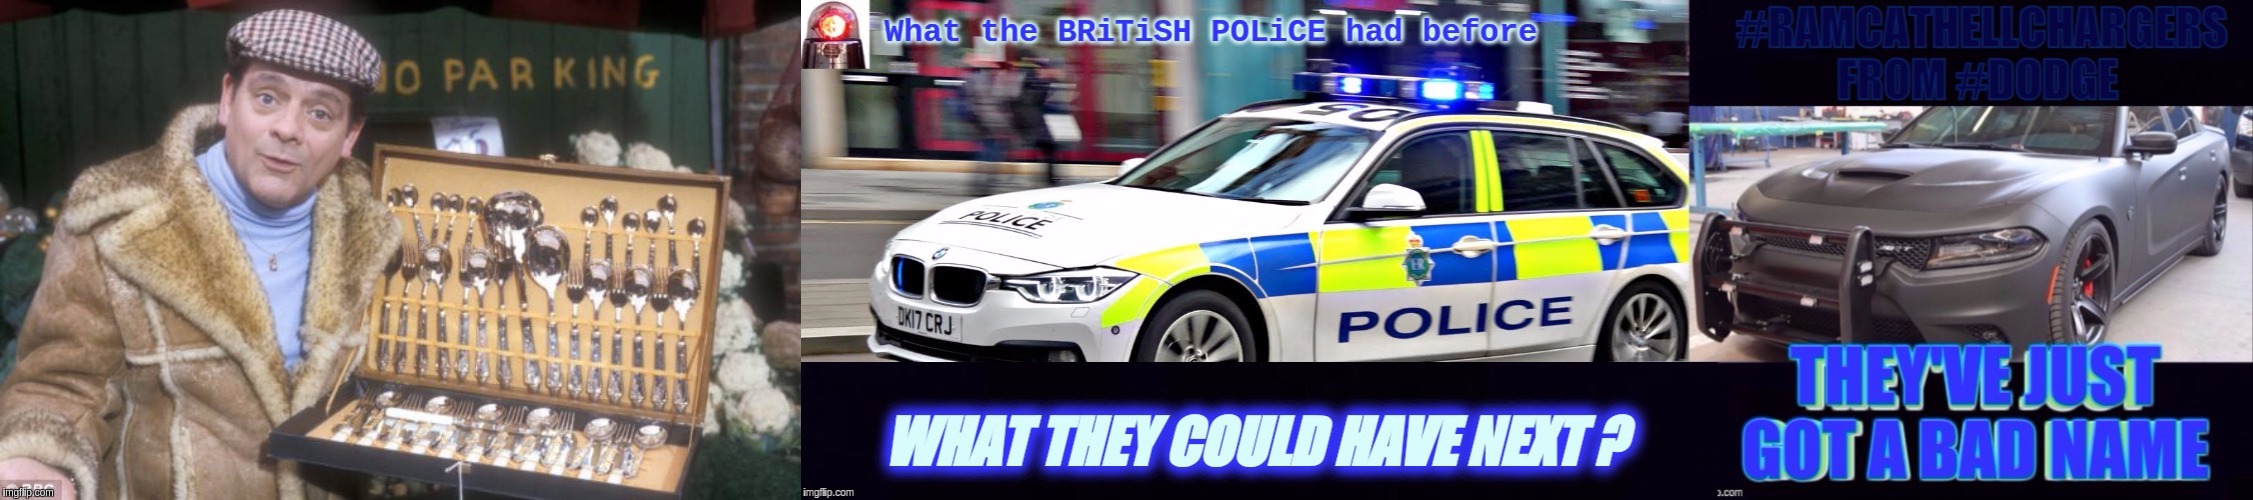 THESE #LOOK MORE UP TO THE #JOB. | image tagged in the great awakening,that would be great,police,uk,prime minister,cars | made w/ Imgflip meme maker